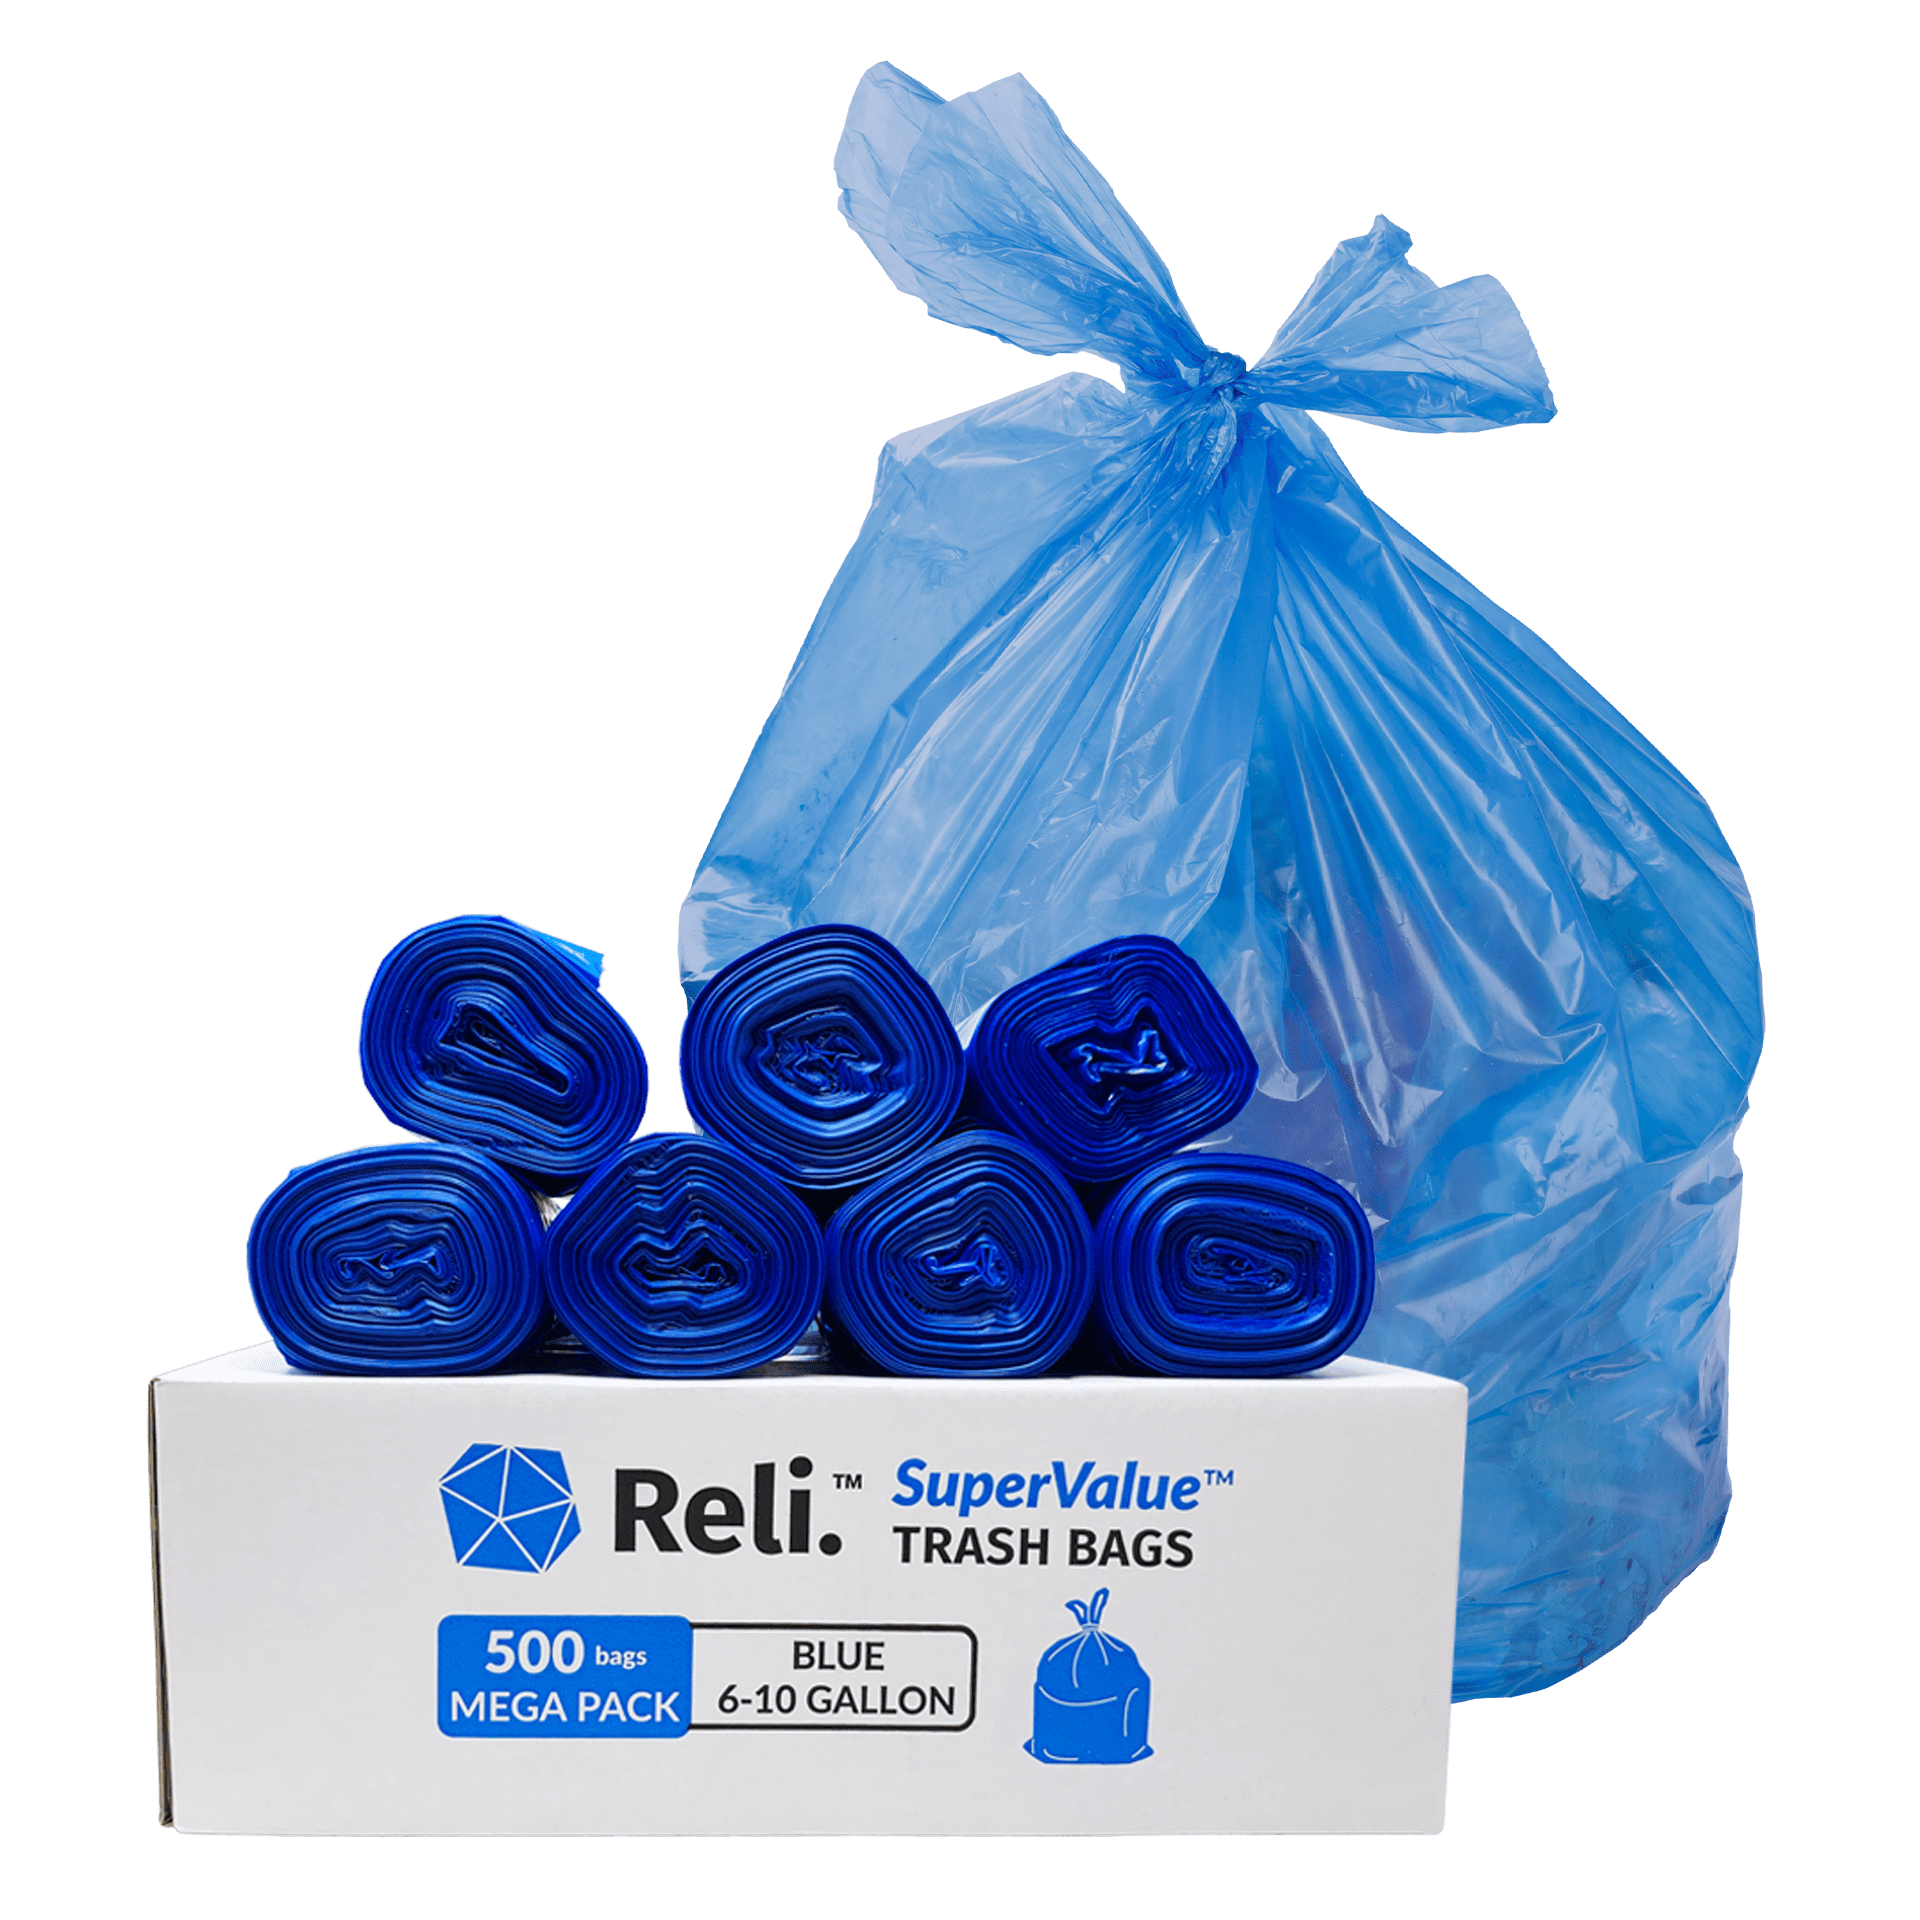 Reli. EcoStrong 13 Gallon Trash Bags (500 Count) - Recycled Material